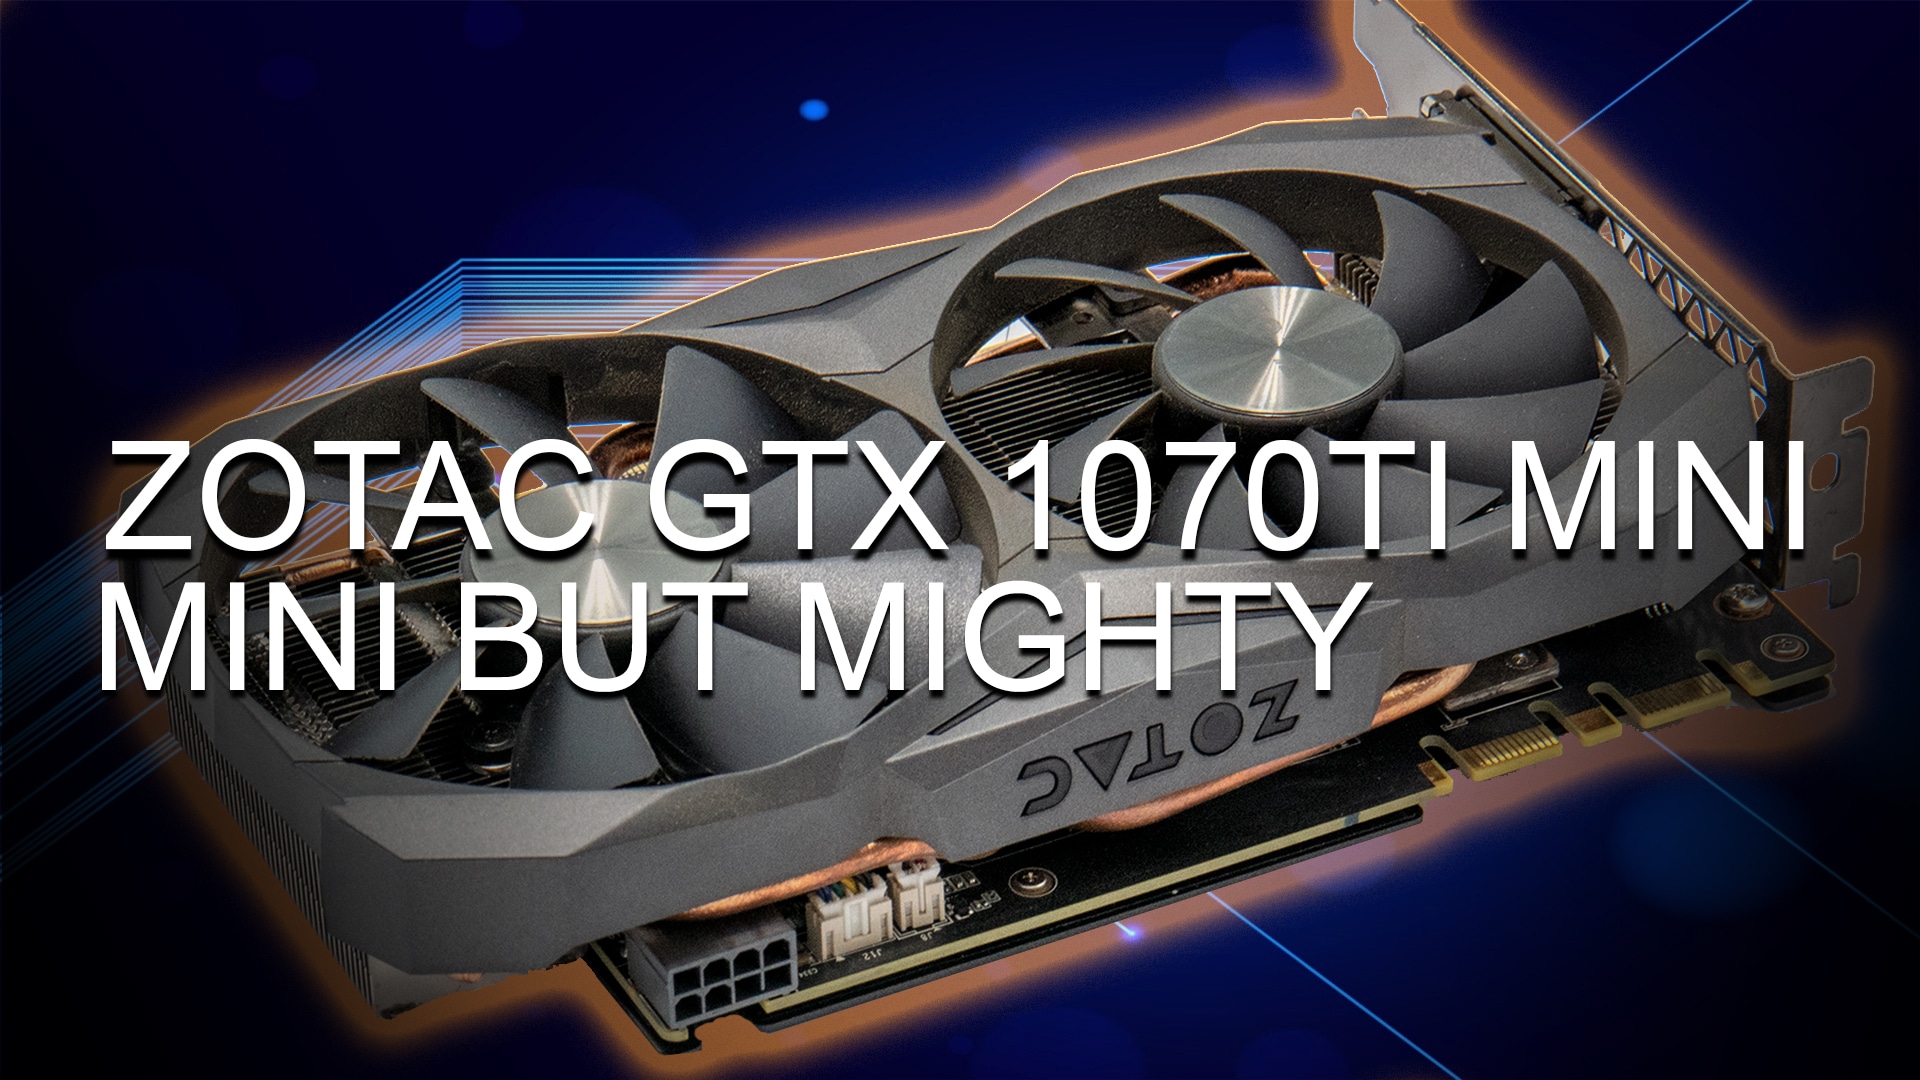 PC/タブレット PCパーツ Zotac GTX 1070Ti Mini Review: Good things can come in small packages